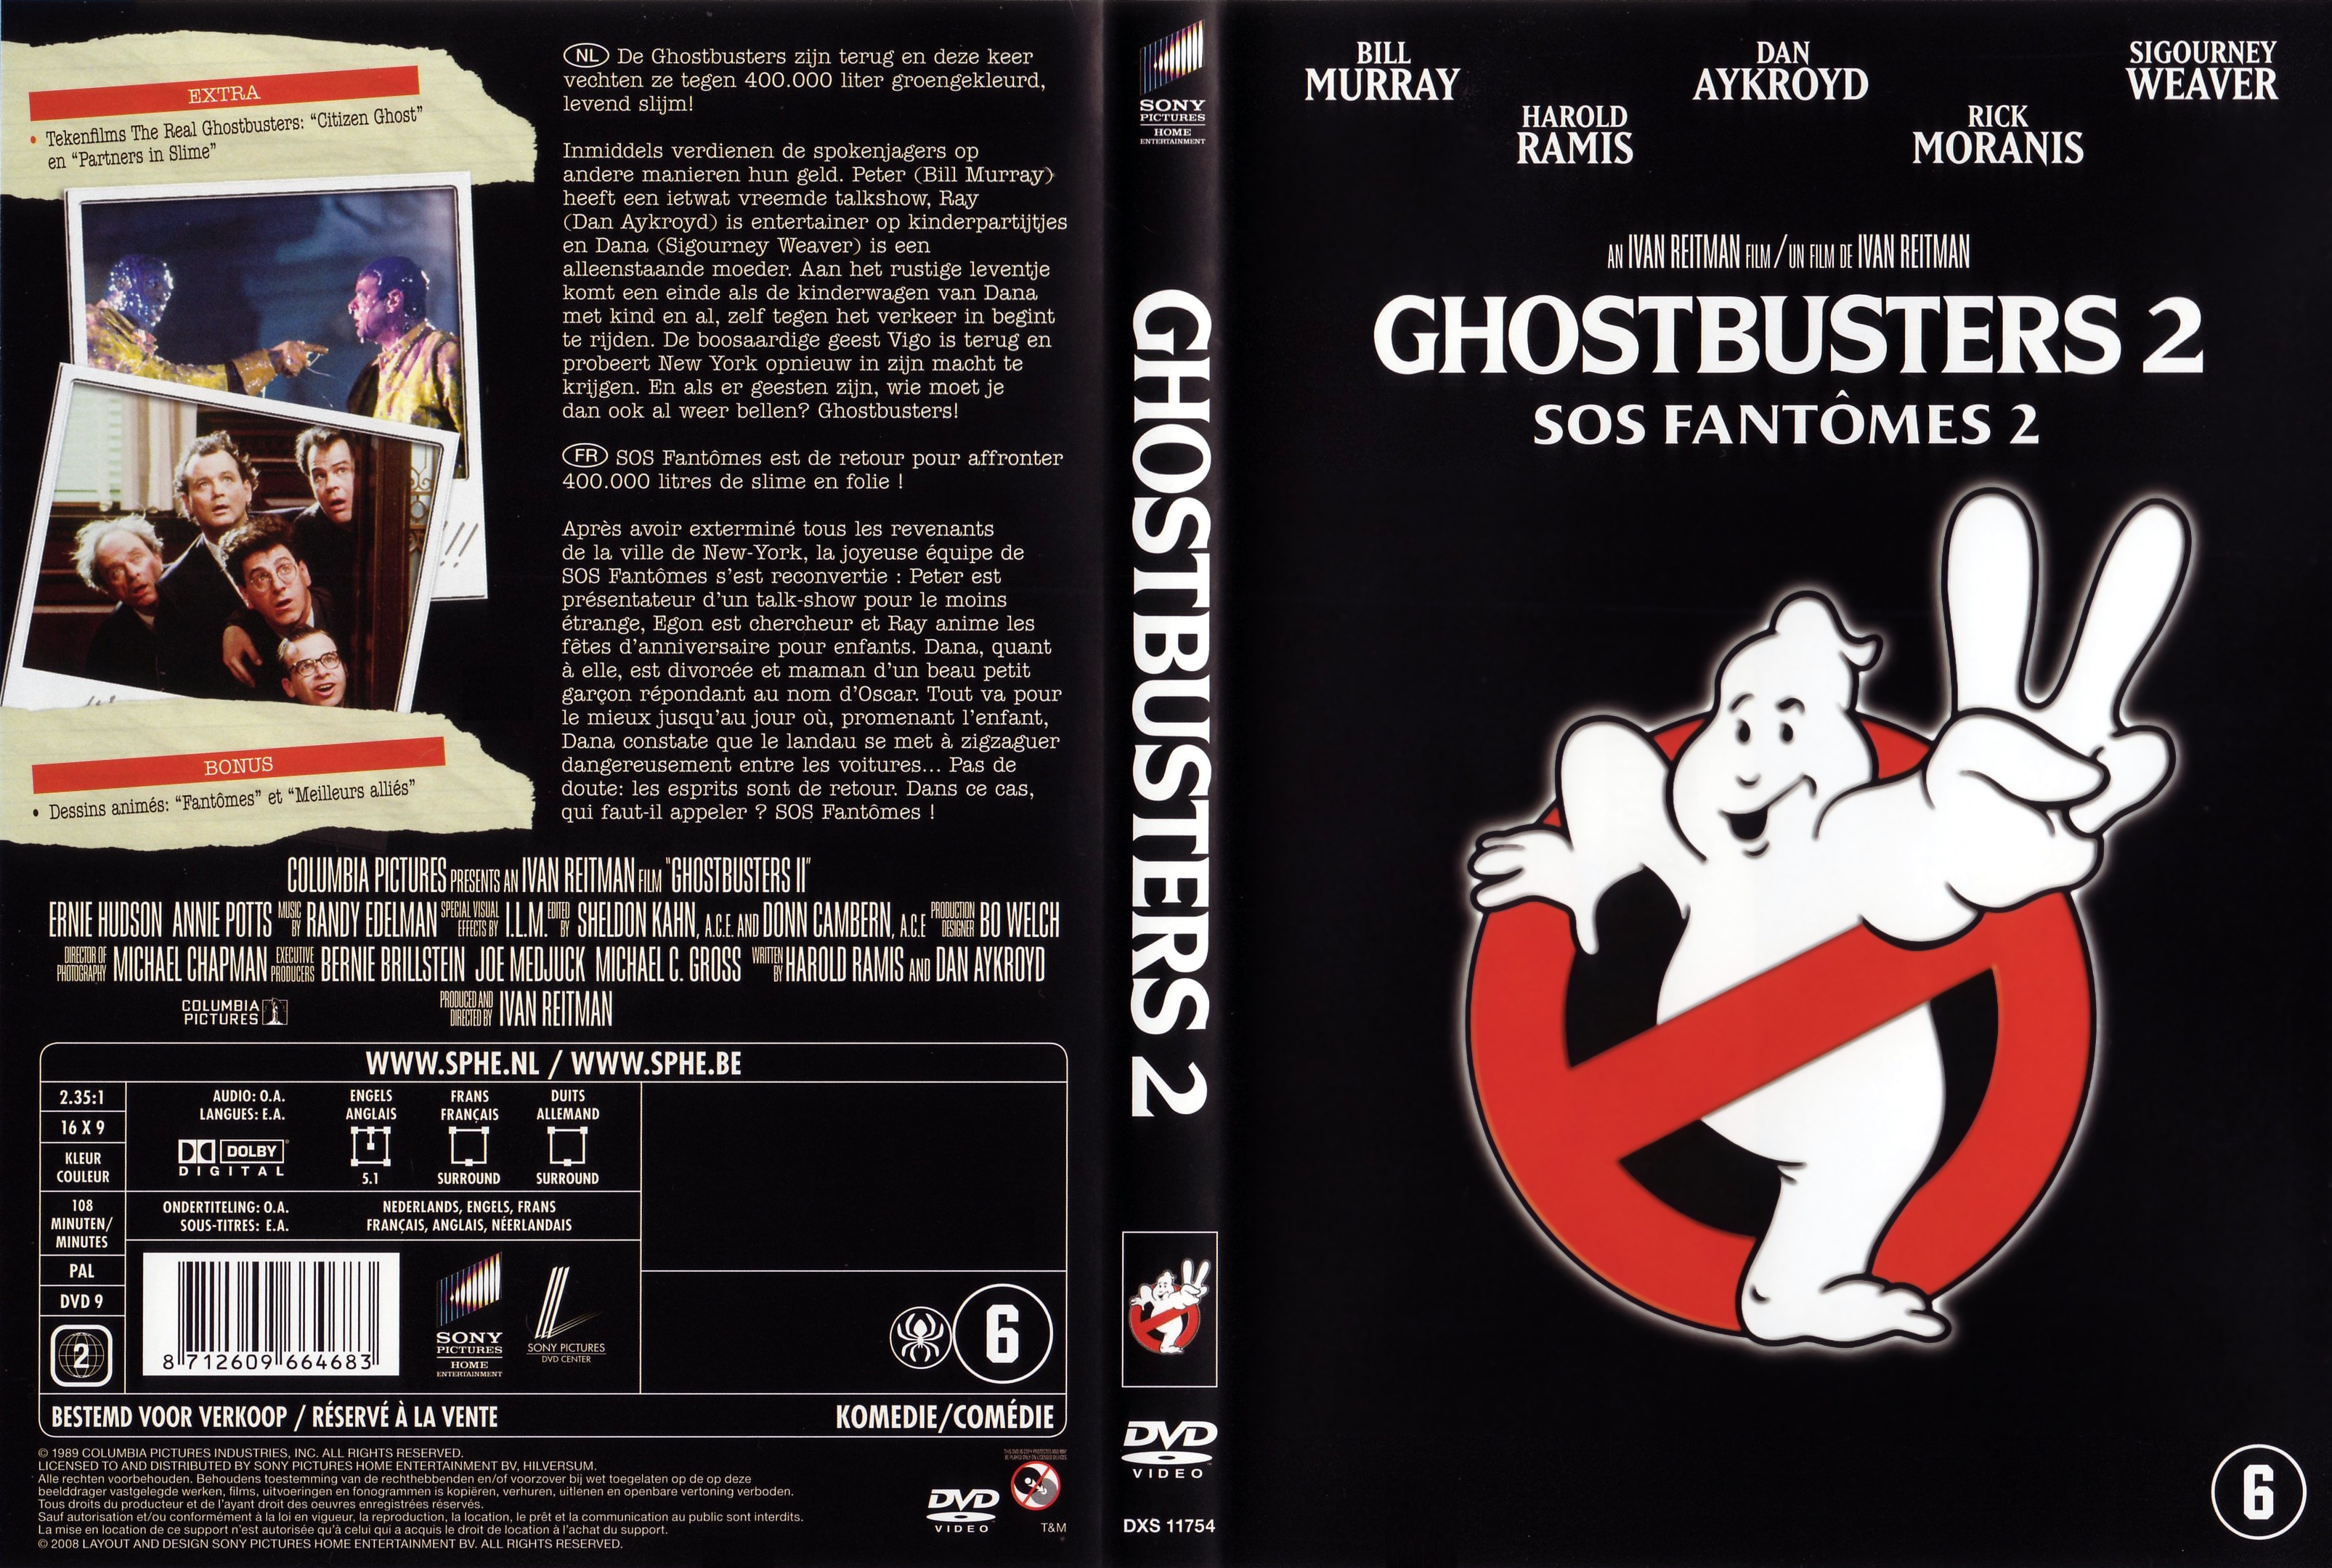 Jaquette DVD SOS Fantomes - Ghostbusters 2